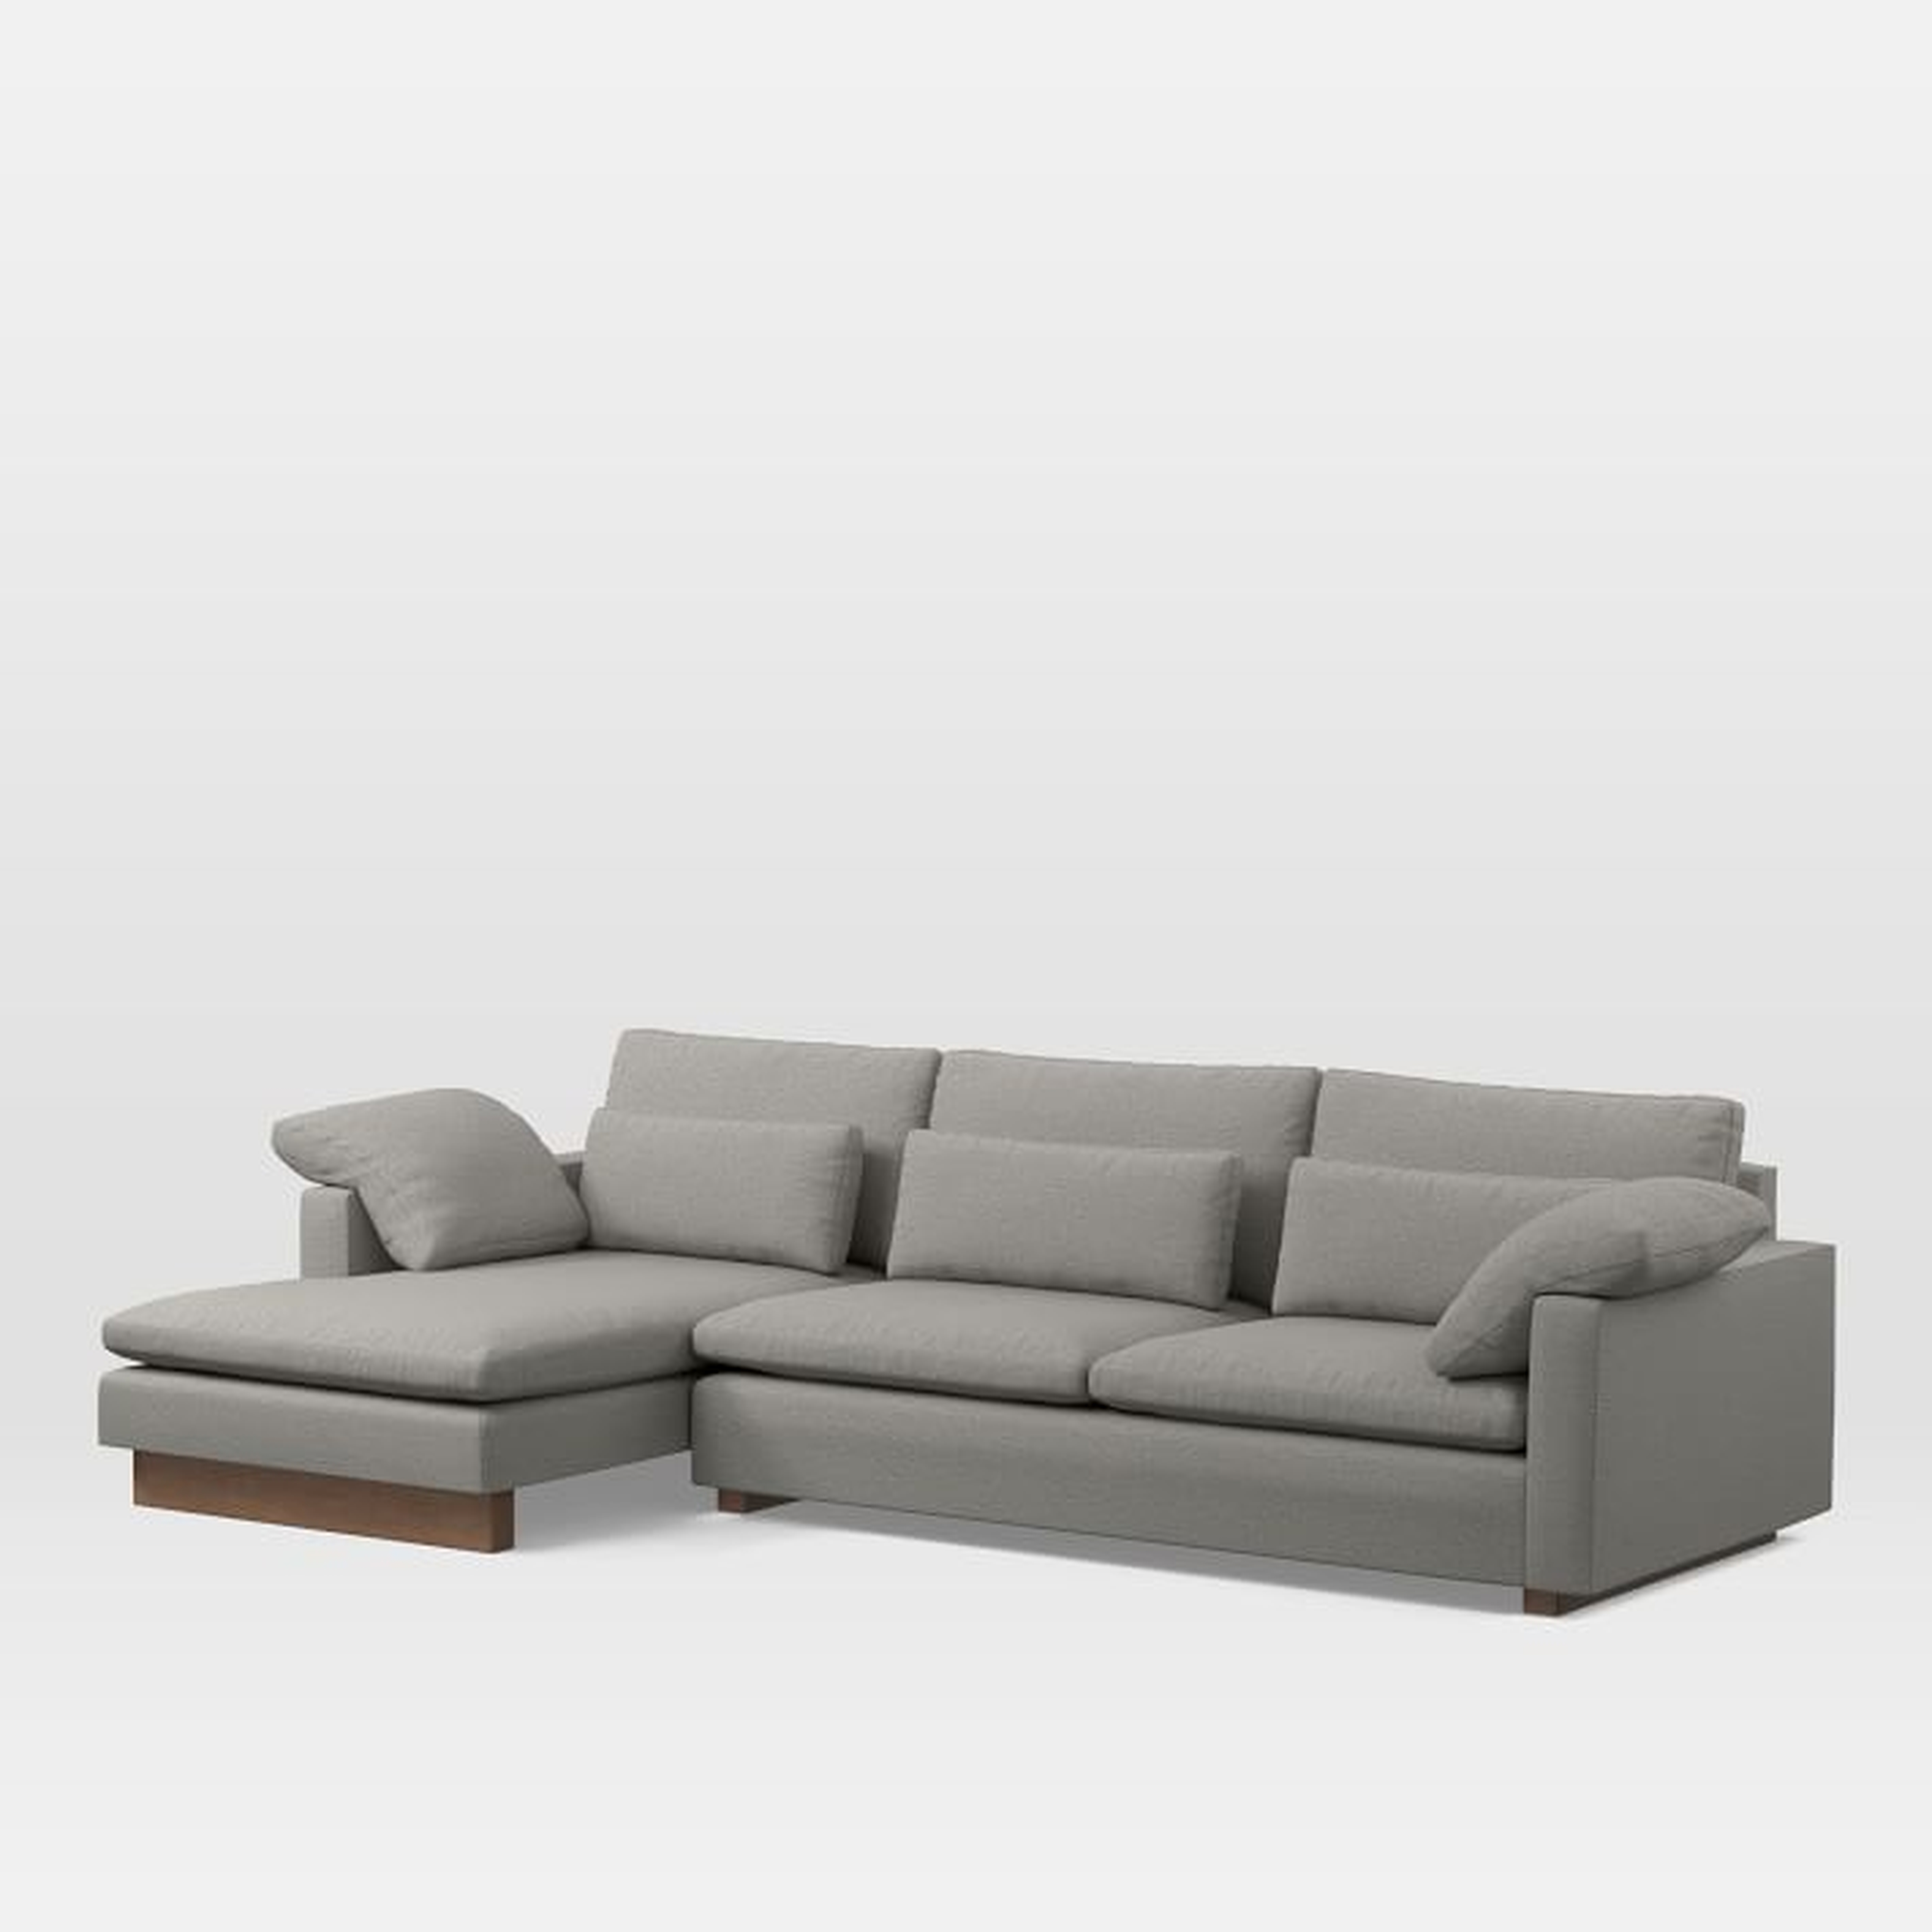 Harmony Left 2-Piece Chaise Sectional (112" width, 41" standard depth) - orientation should be as product photo - West Elm